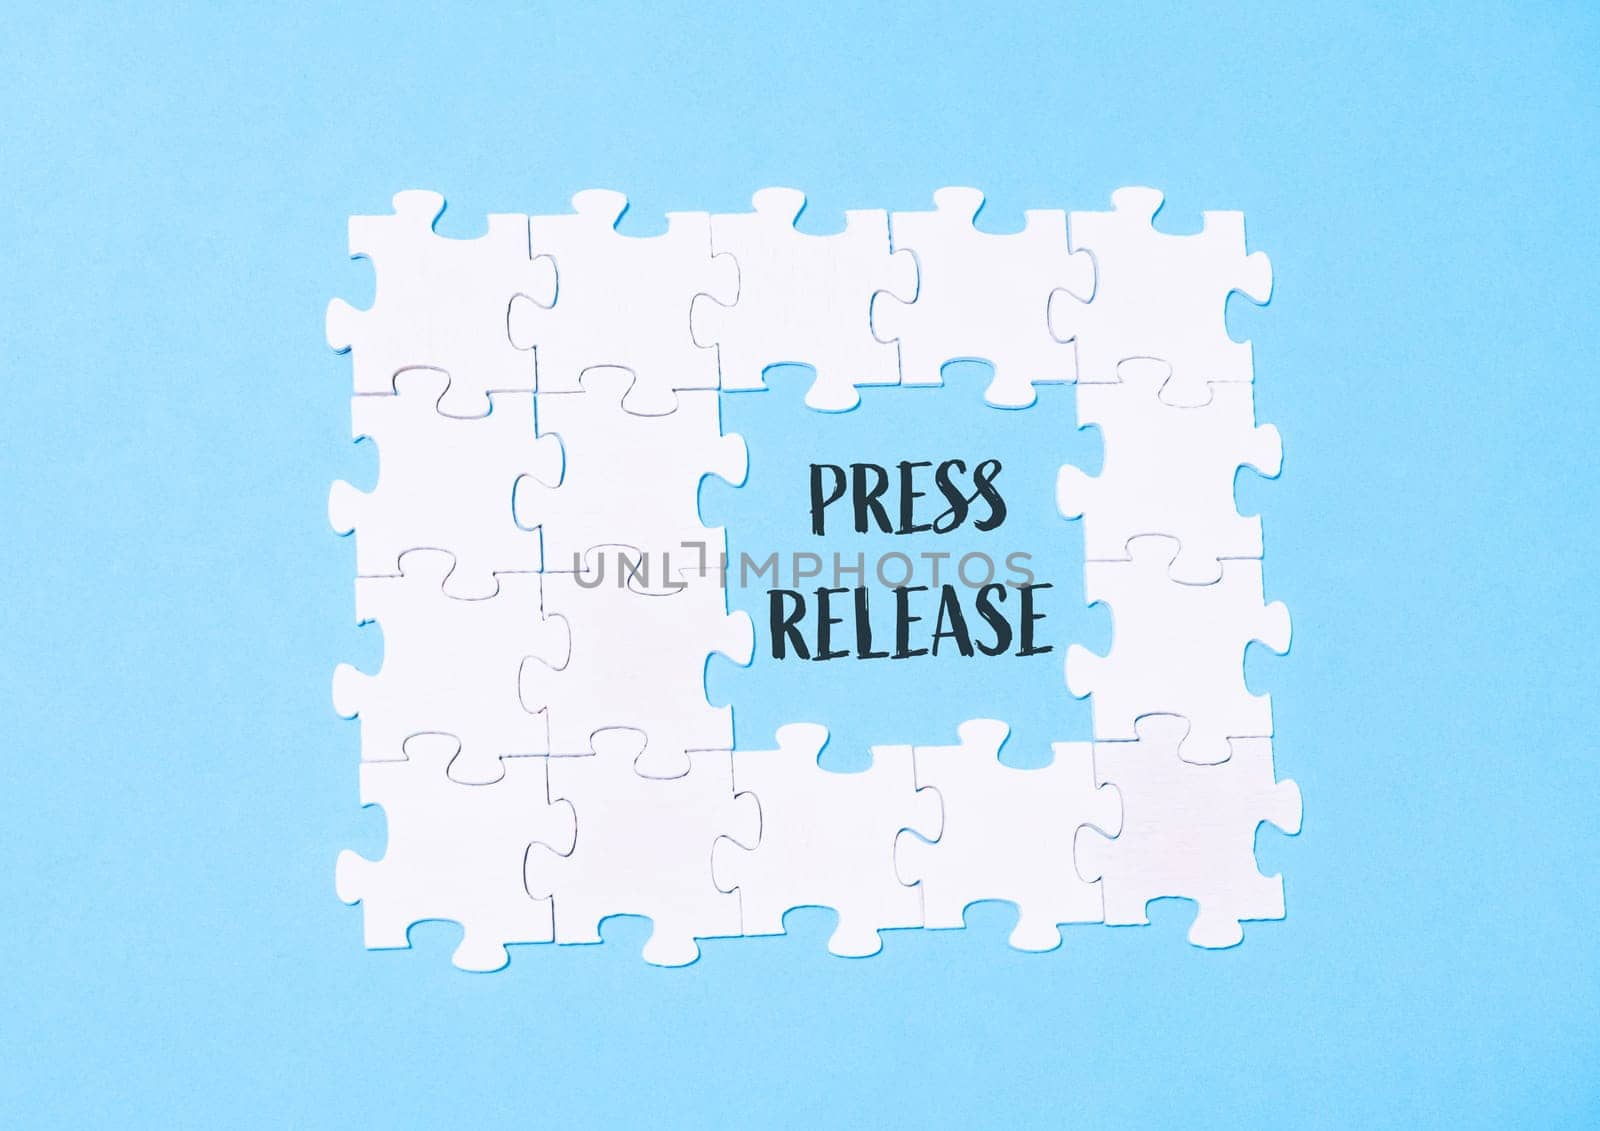 A puzzle with the word press release written in the middle. The puzzle is made up of white pieces and is on a blue background